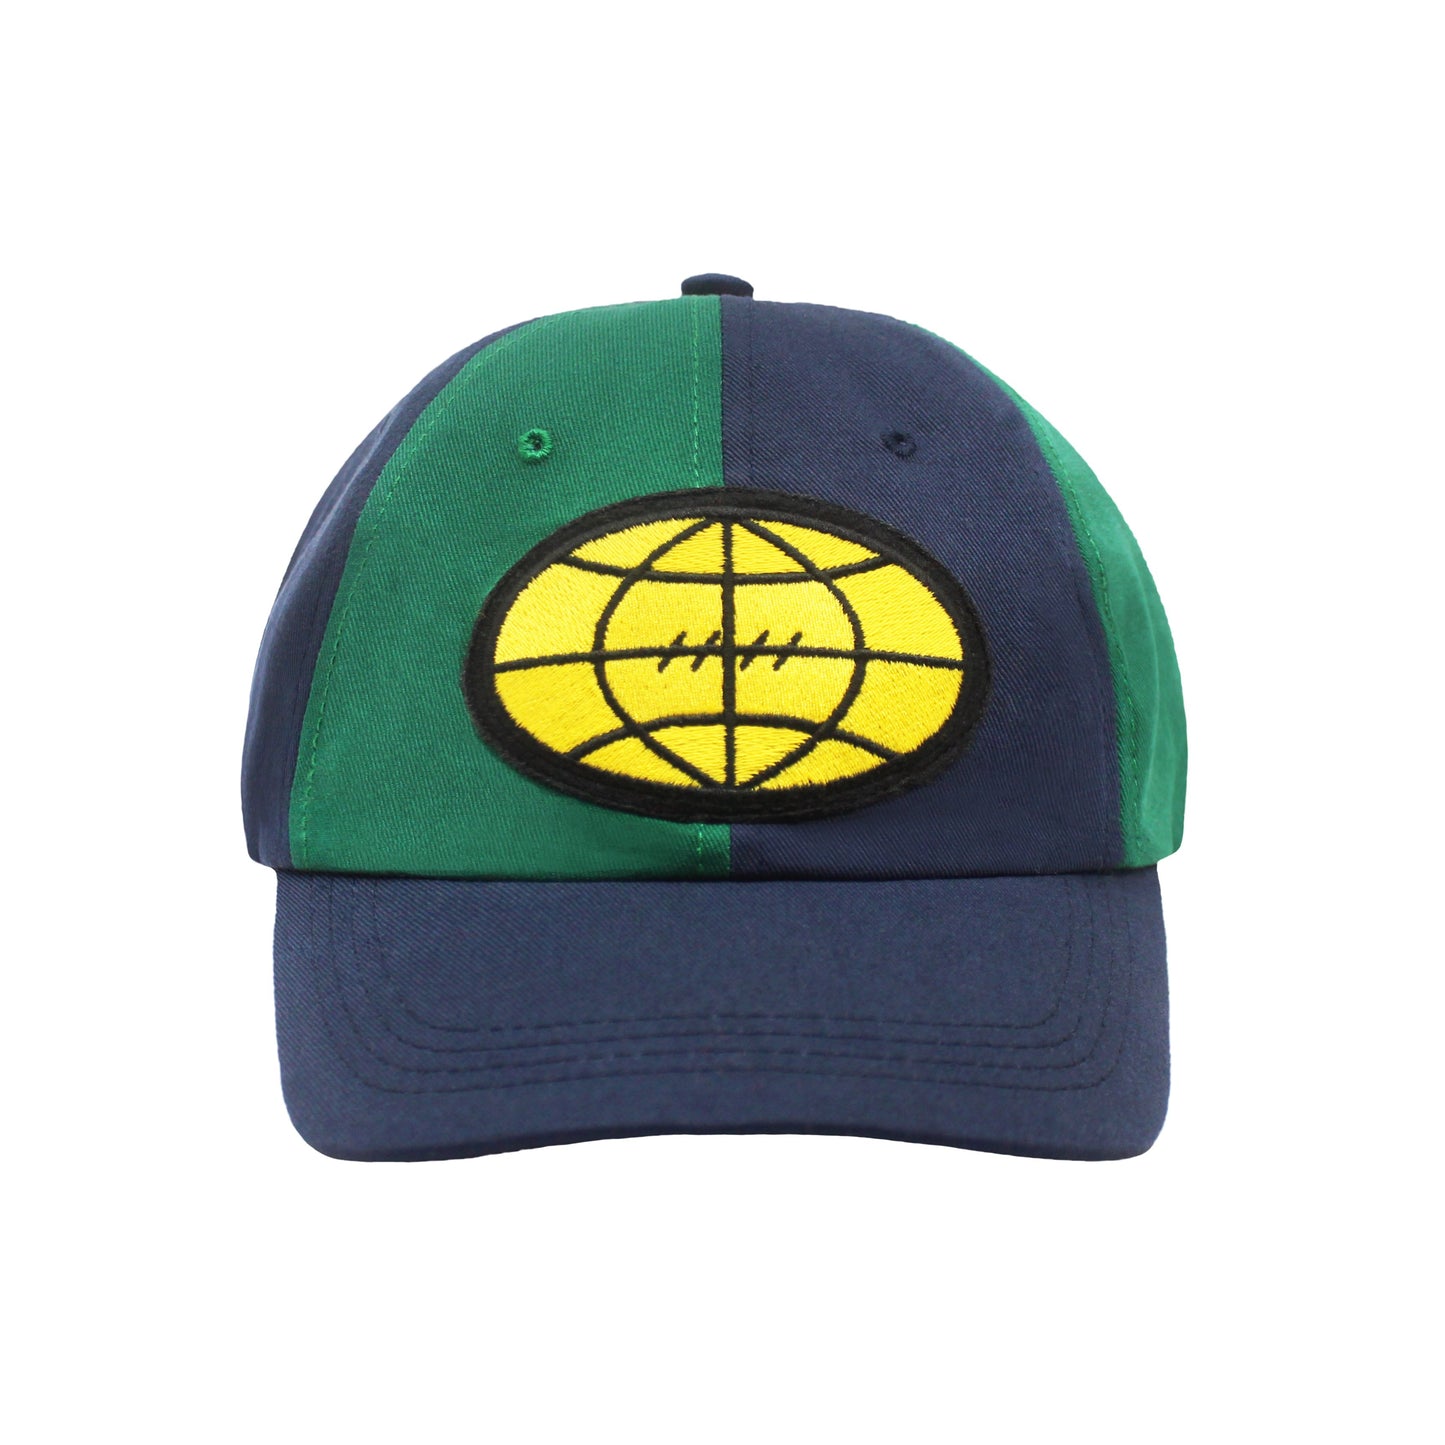 Green and Navy Rugby Ball Cap